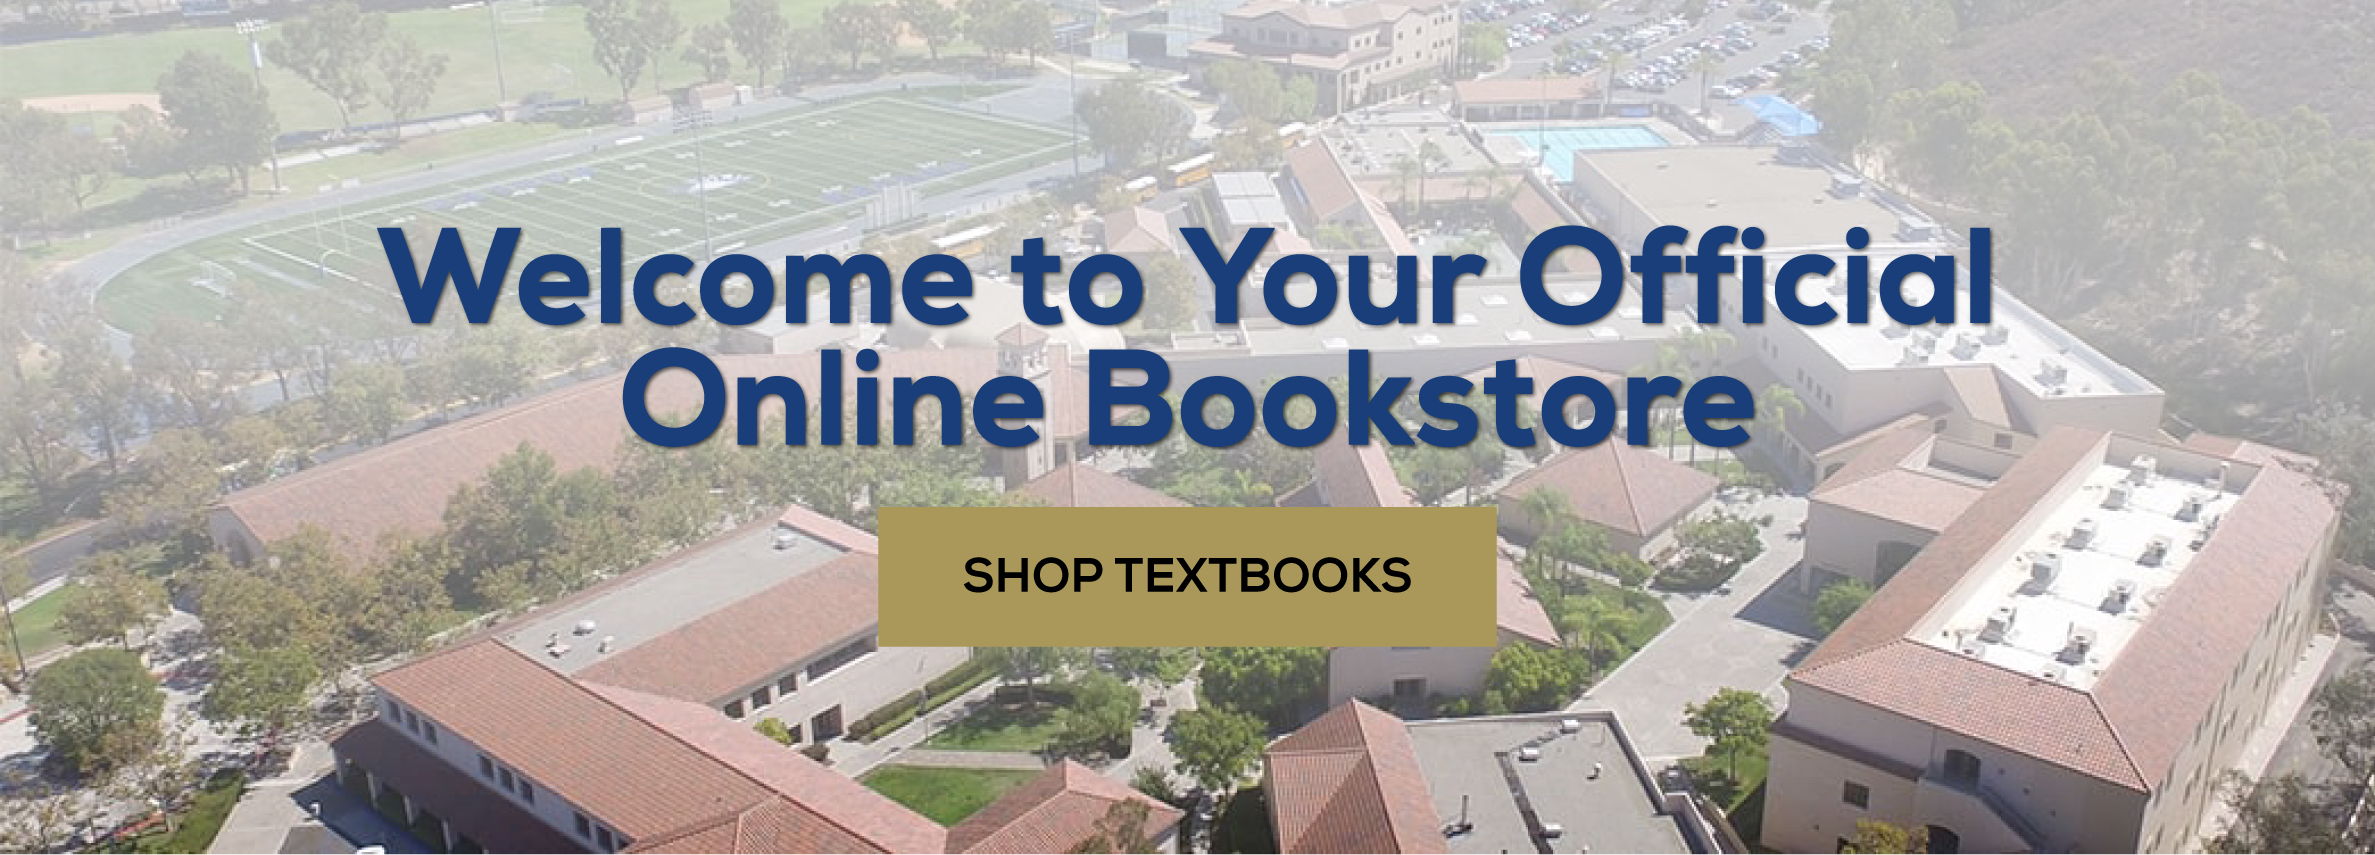 Welcome to your official online bookstore Shop textbooks